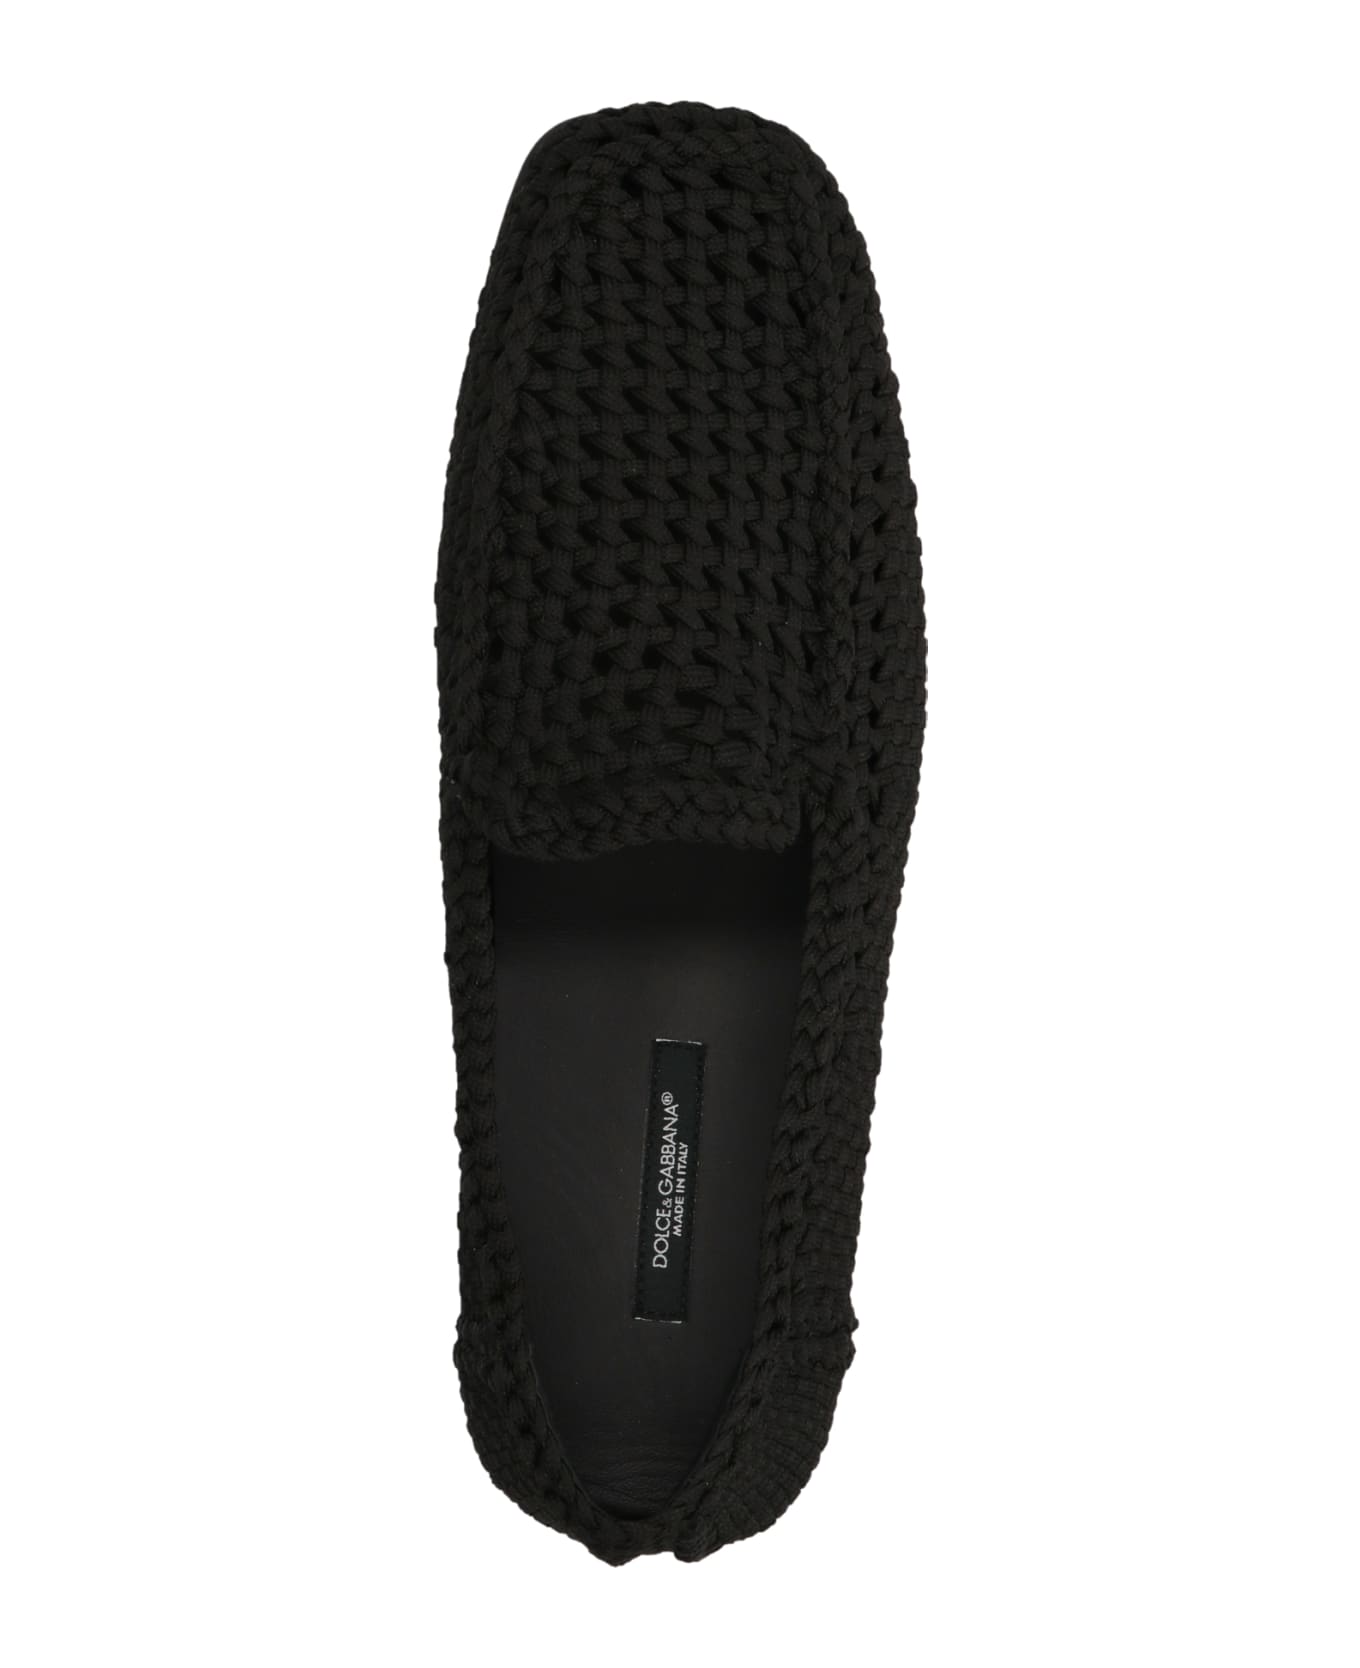 Dolce & Gabbana Cable Loafers - Black  